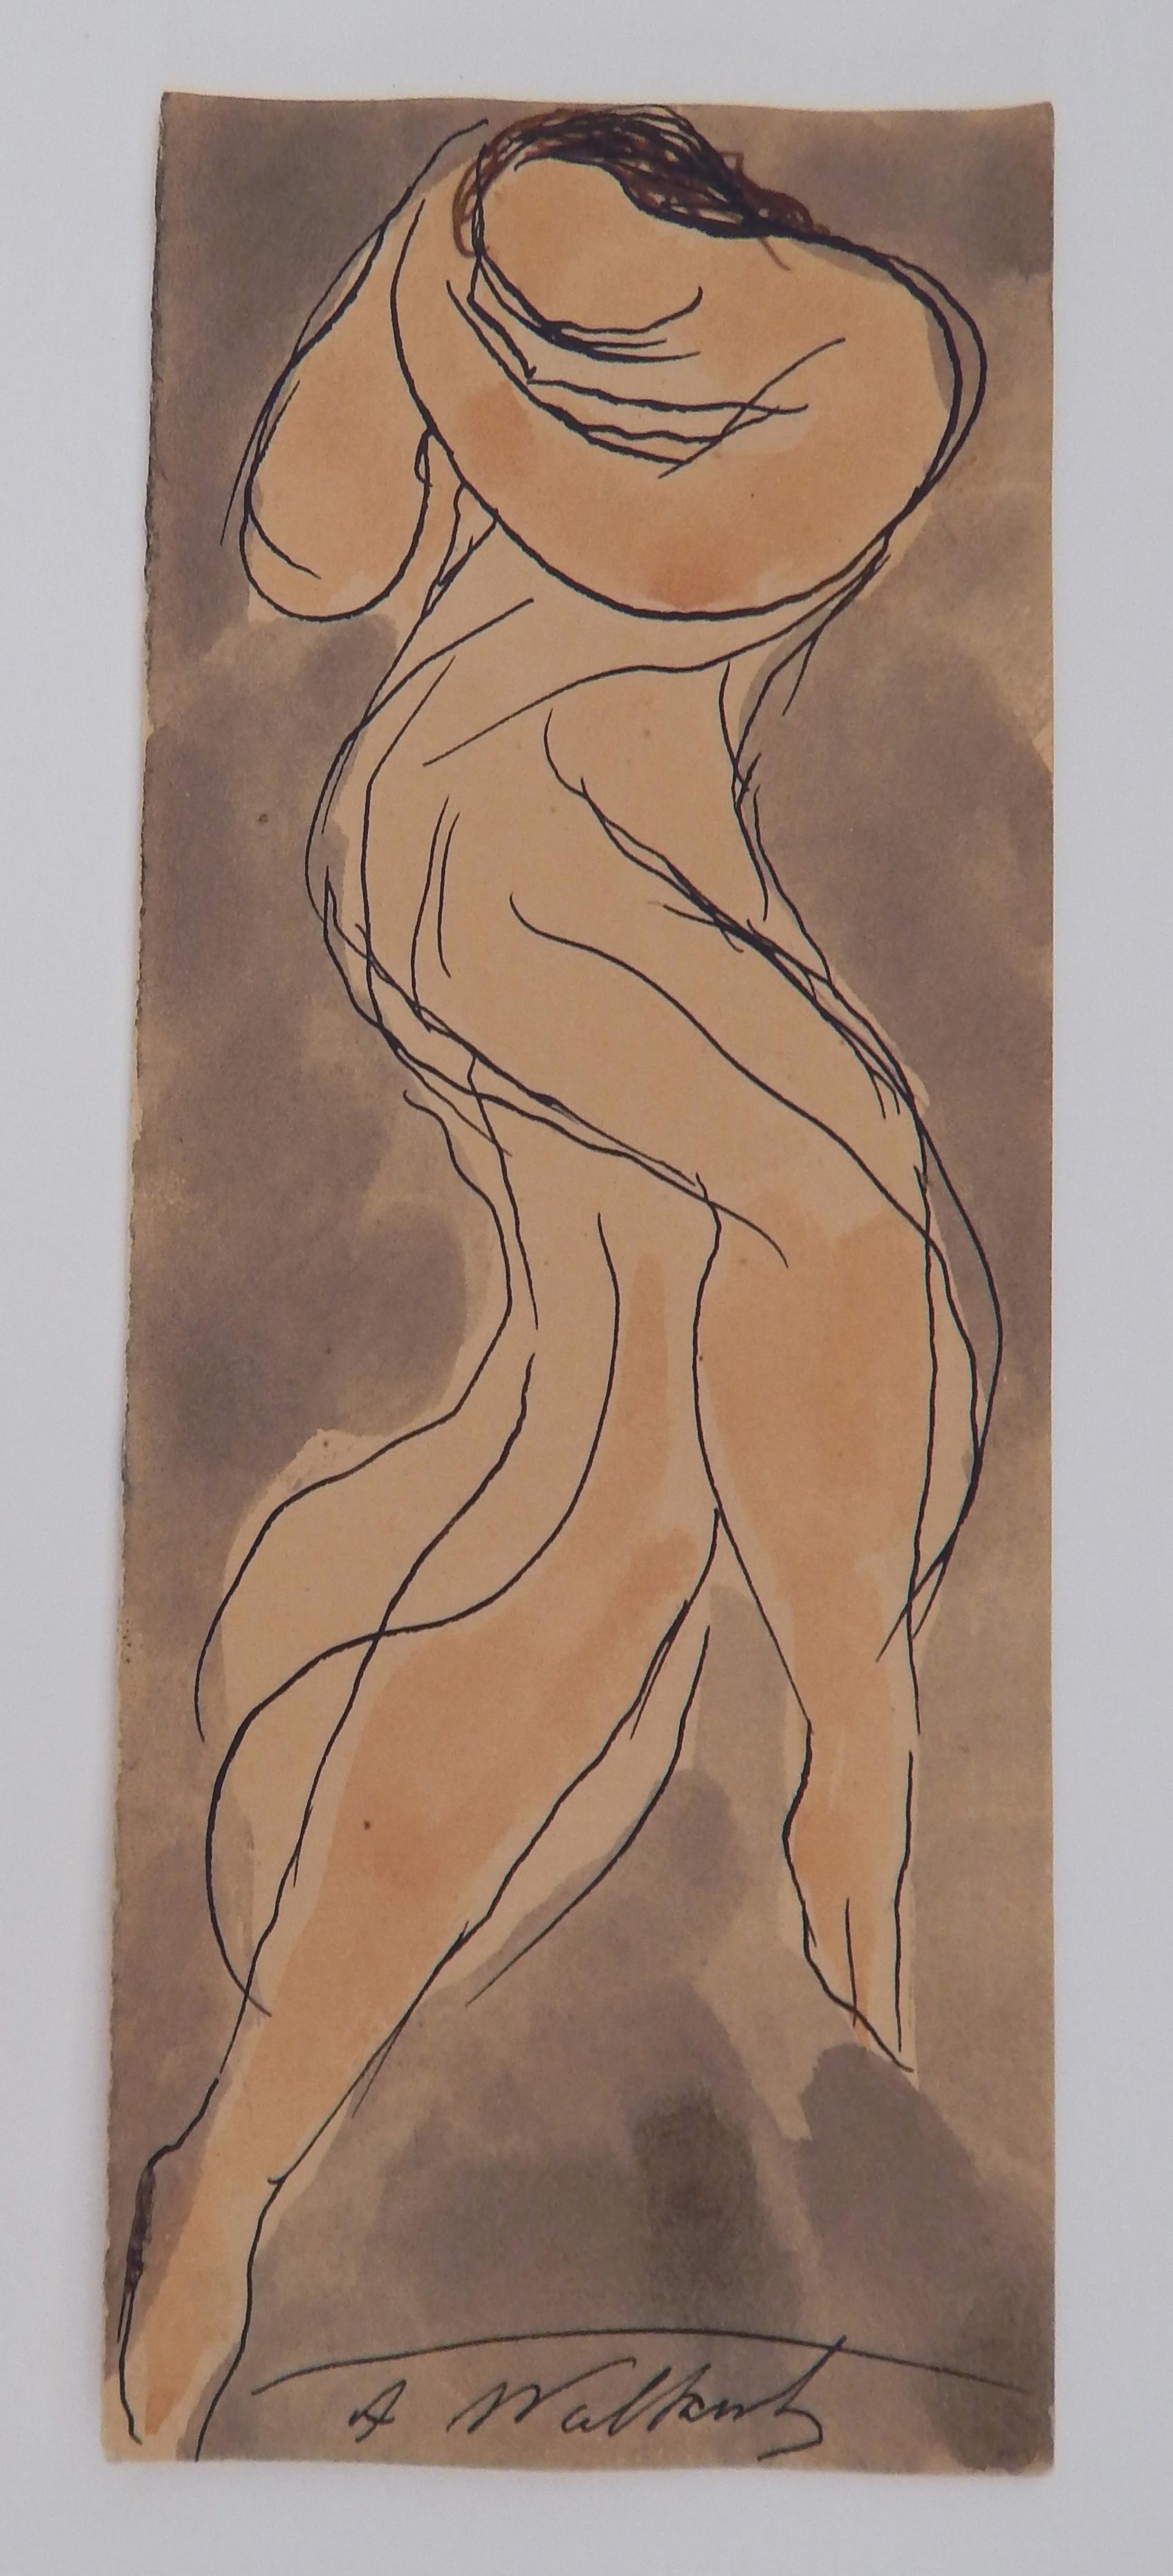 Original pen and ink with watercolor by American Modernist Abraham Walkowitz (1878-1965)
Depicting one of his favorite subjects, Isadora Duncan, the “Mother of Modern Dance.”
In excellent condition, circa 1920s. Signed in ink lower